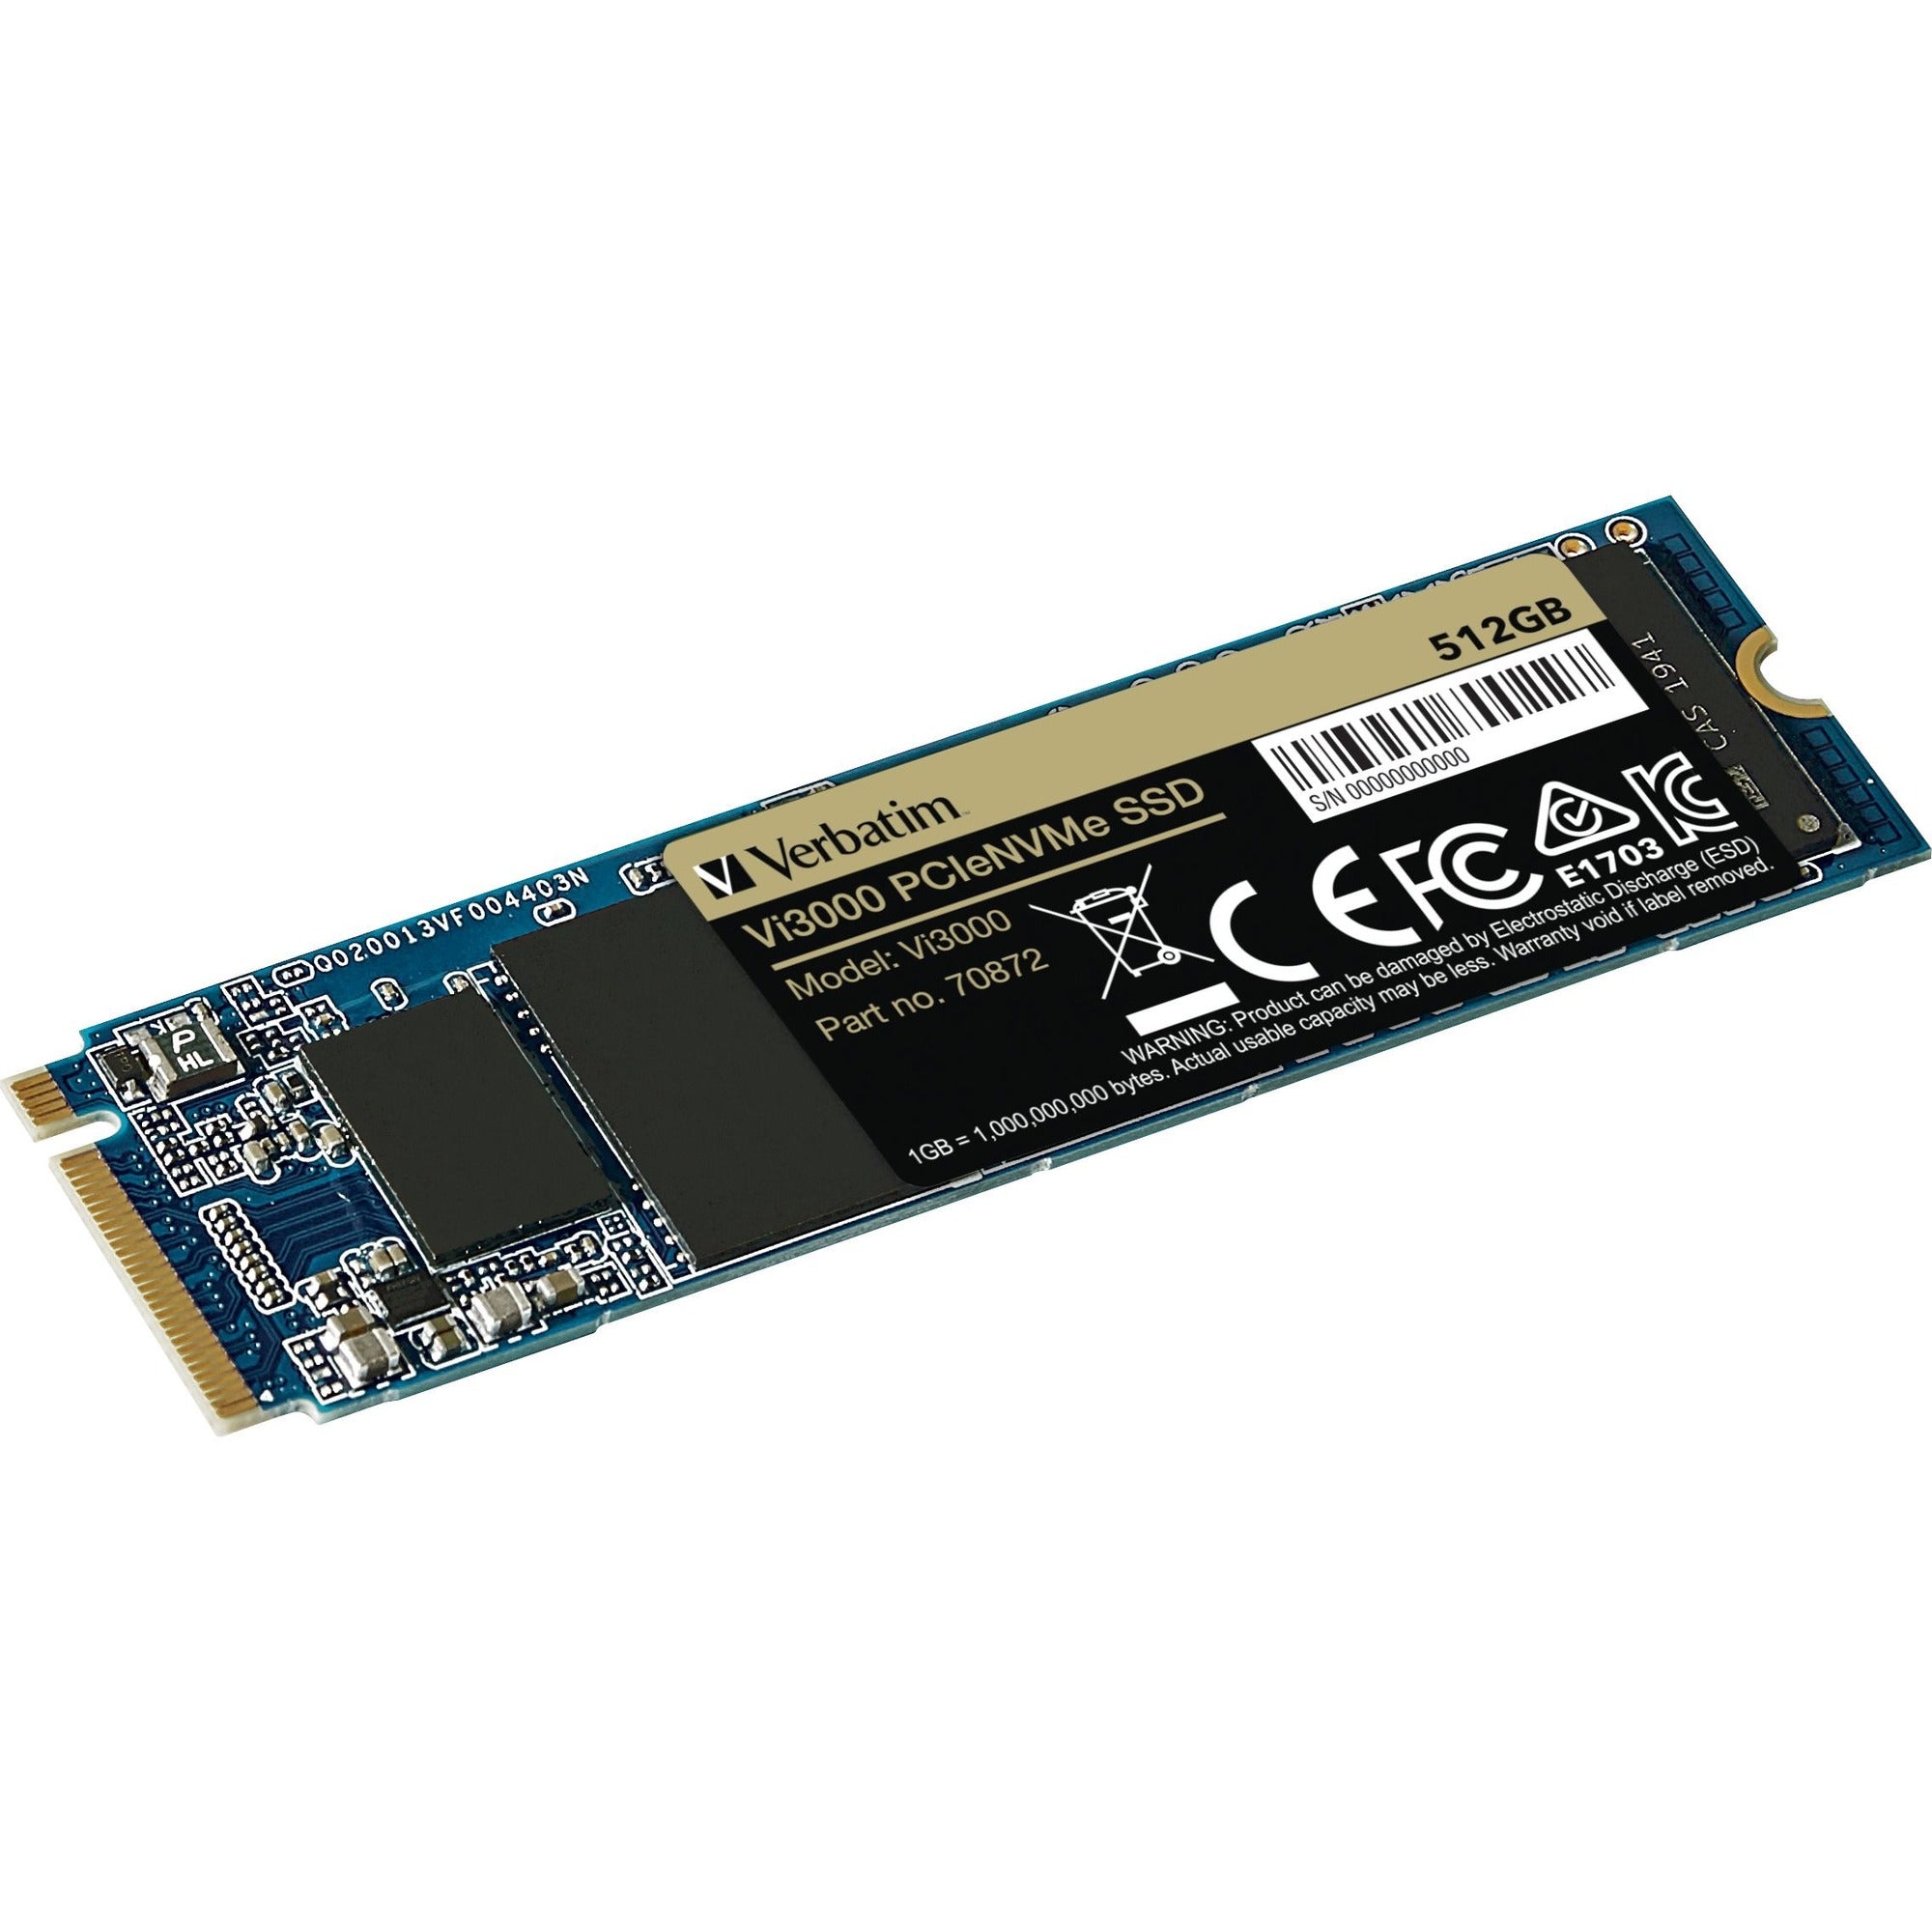 verbatim-vi3000-512-gb-solid-state-drive-m2-2280-internal-pci-express-nvme-pci-express-nvme-30-x4-notebook-desktop-pc-device-supported-300-tb-tbw-3000-mb-s-maximum-read-transfer-rate-5-year-warranty_ver70872 - 1